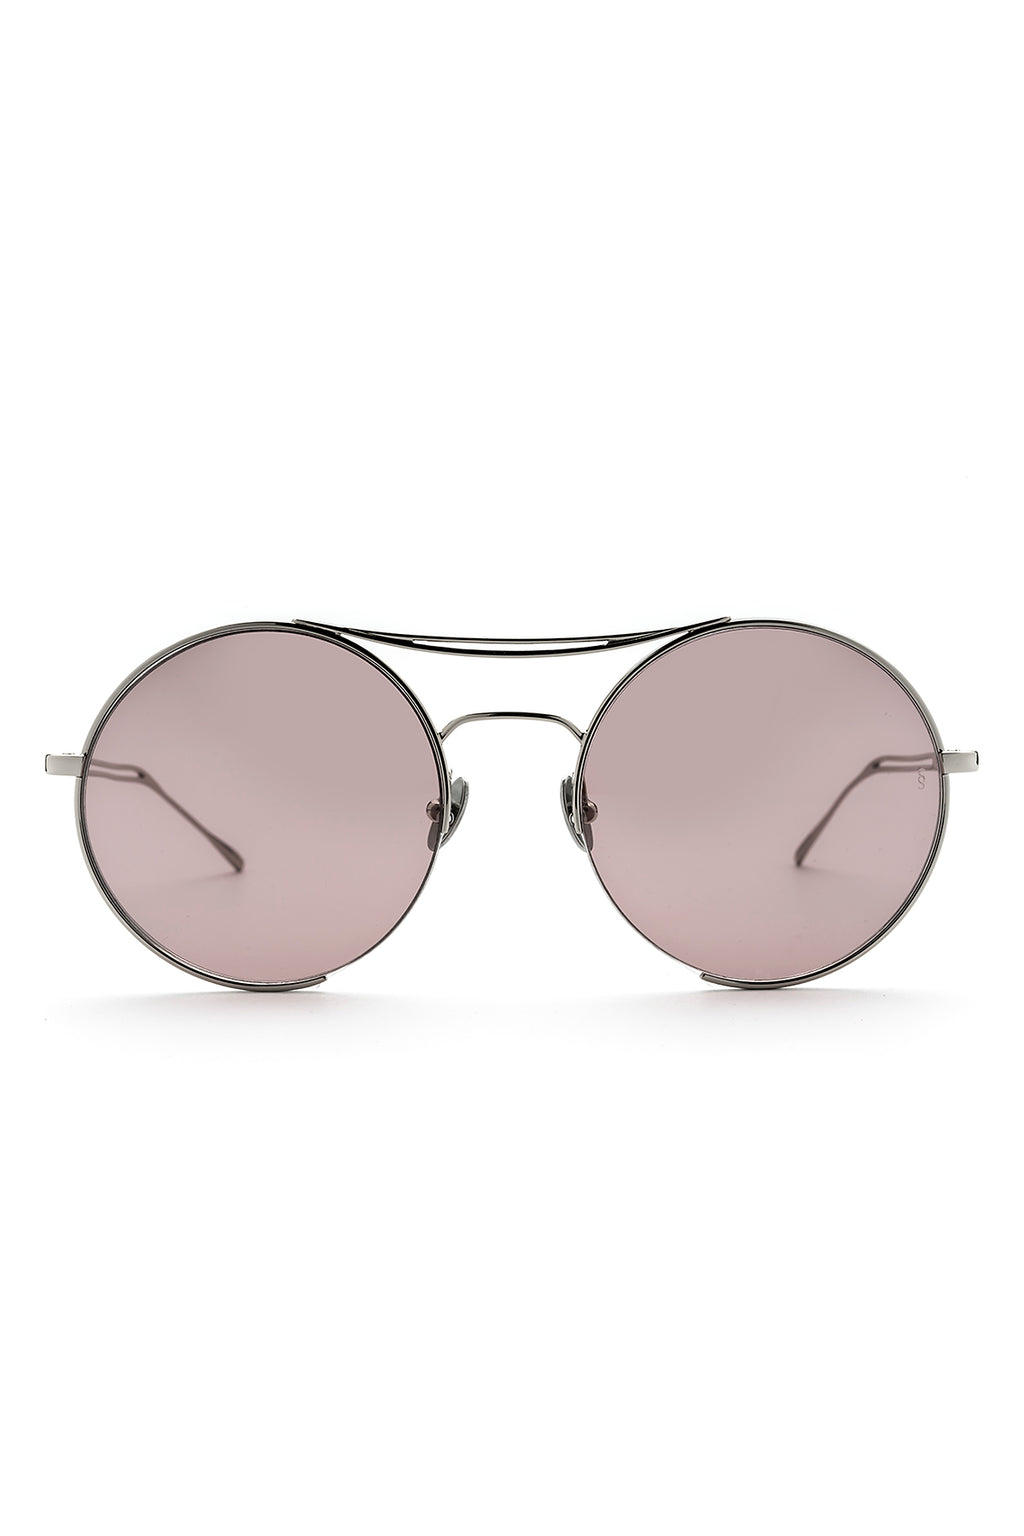 GOLDIE Sunglasses, Silver